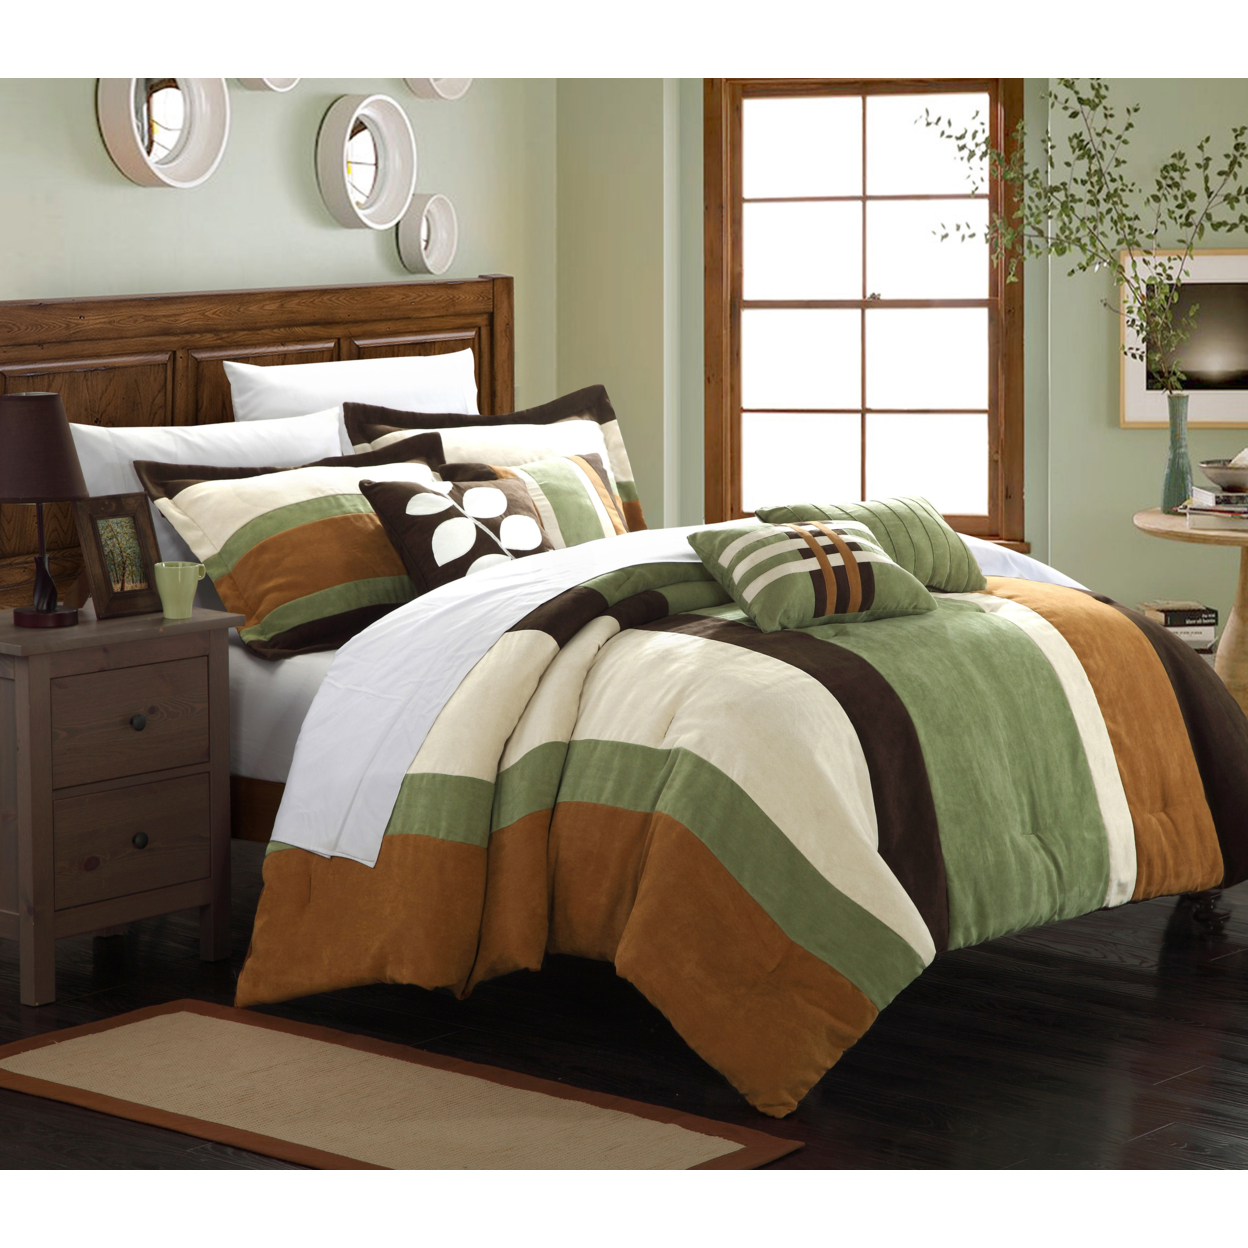 Chic Home Melodie 7-Piece Plush Microsuede Striped Comforter Set - Green, Queen